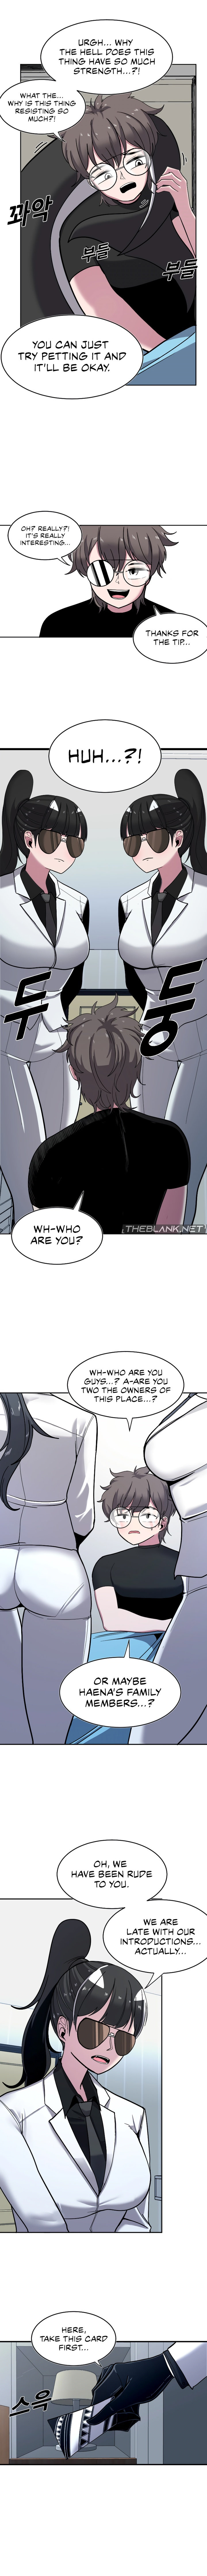 Double Life of Gukbap - Chapter 6 Page 3